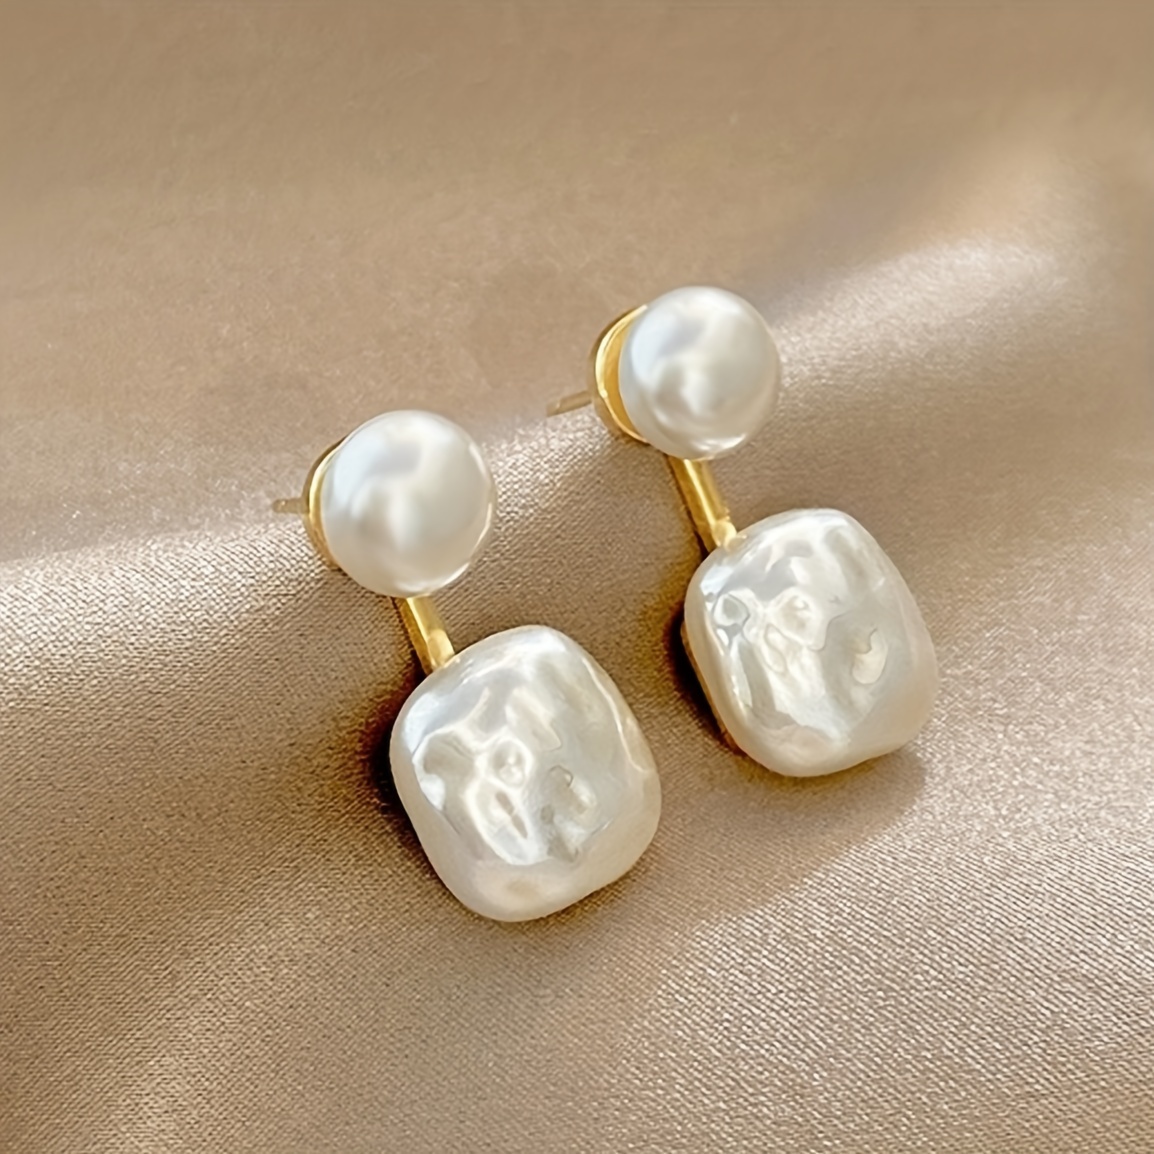 

Exquisite Geometric Imitation Pearl Design Stud Earrings Alloy 14k Gold Plated Jewelry Vintage Bohemian Style Female Dating Earrings